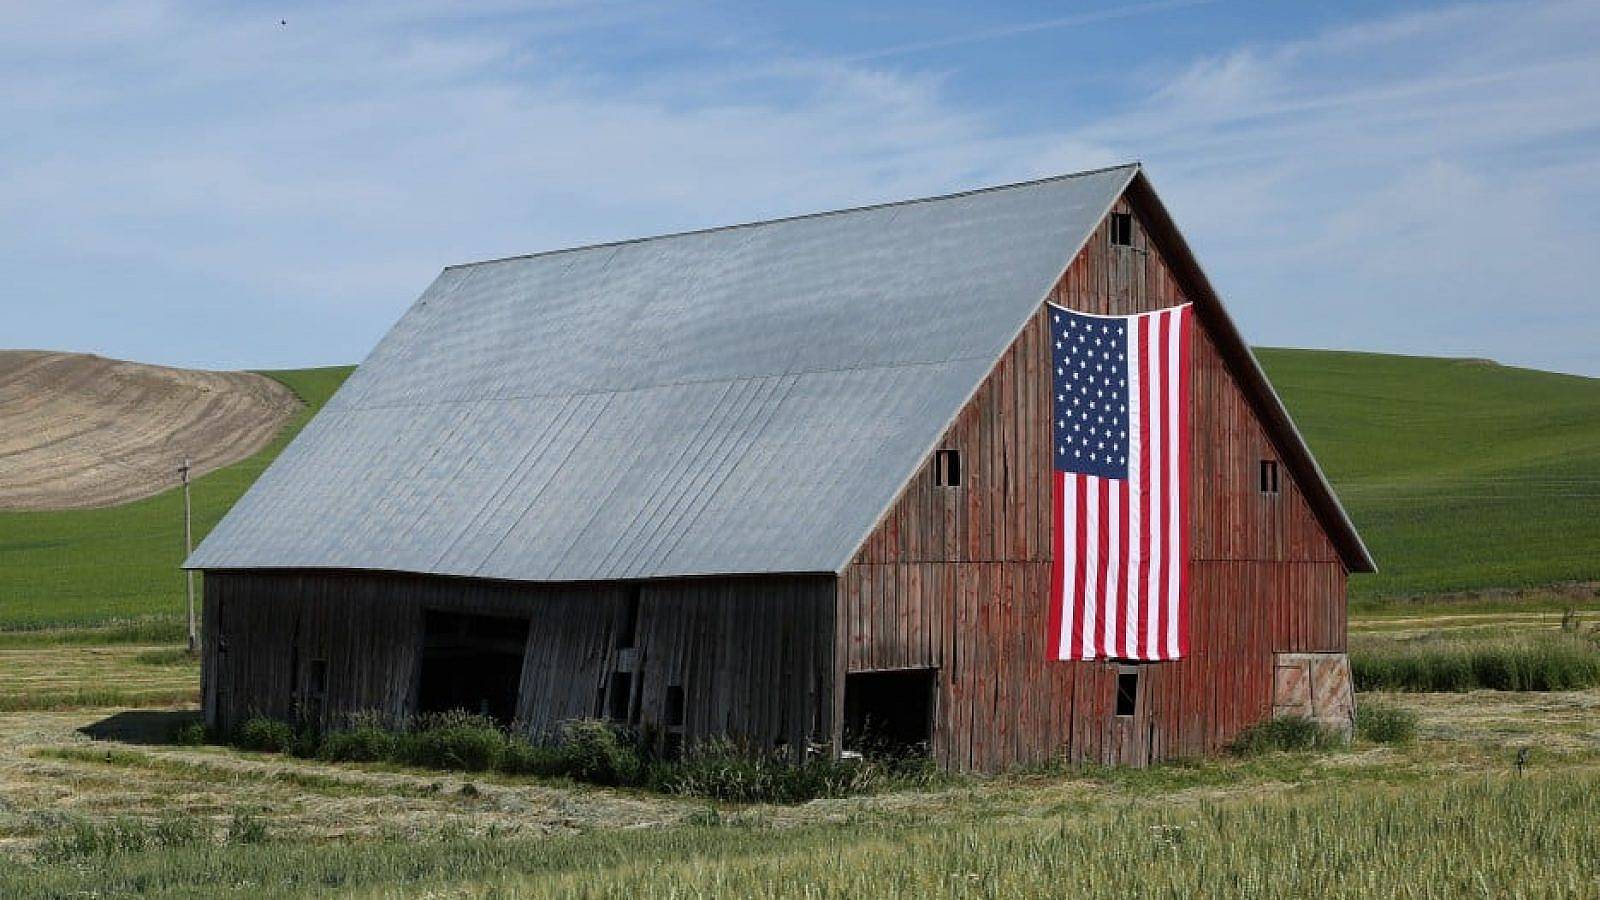 A barn with an American flag on it in rural America.